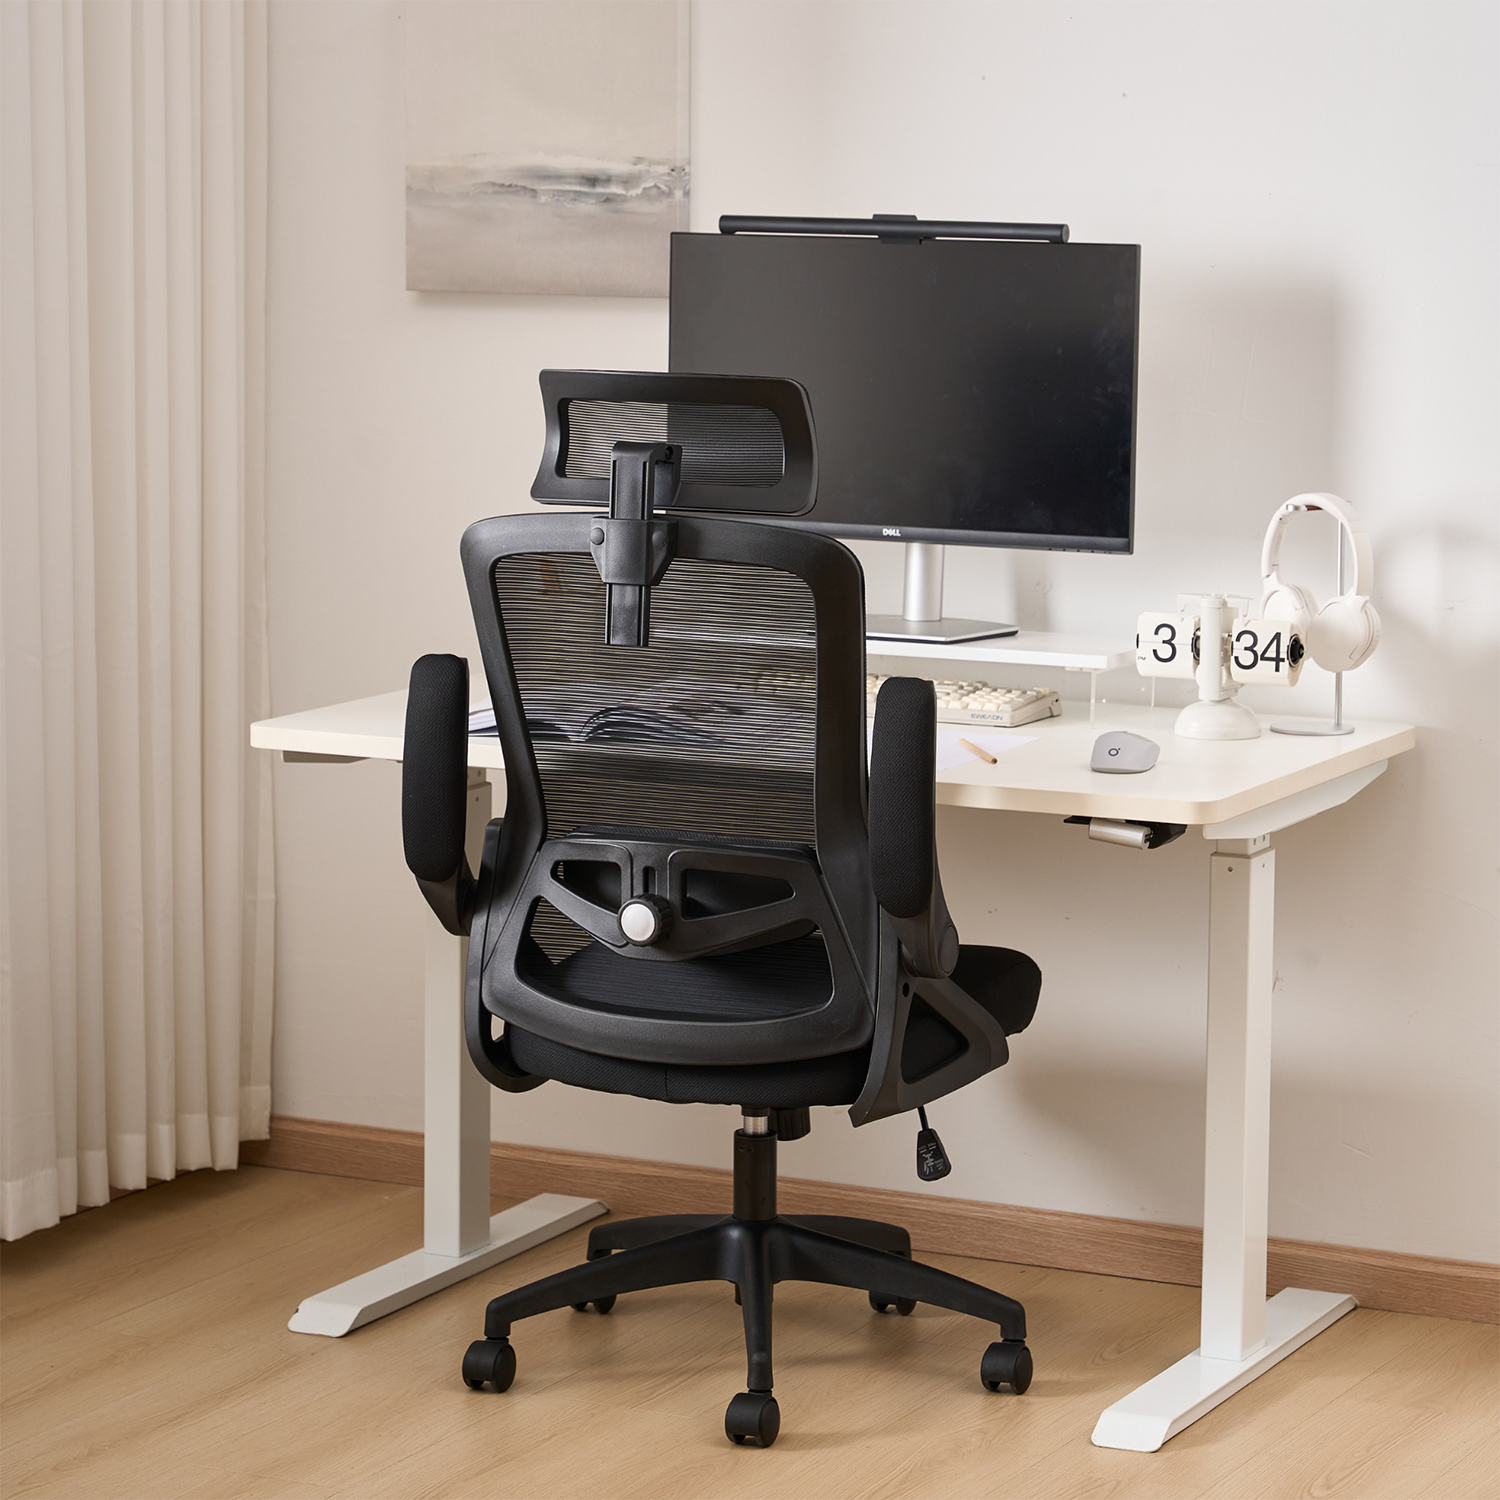 BRTHORY Office Chair Height-Adjustable Ergonomic Desk Chair with Lumbar Support, Breathable Mesh Computer Chair High Back Swivel